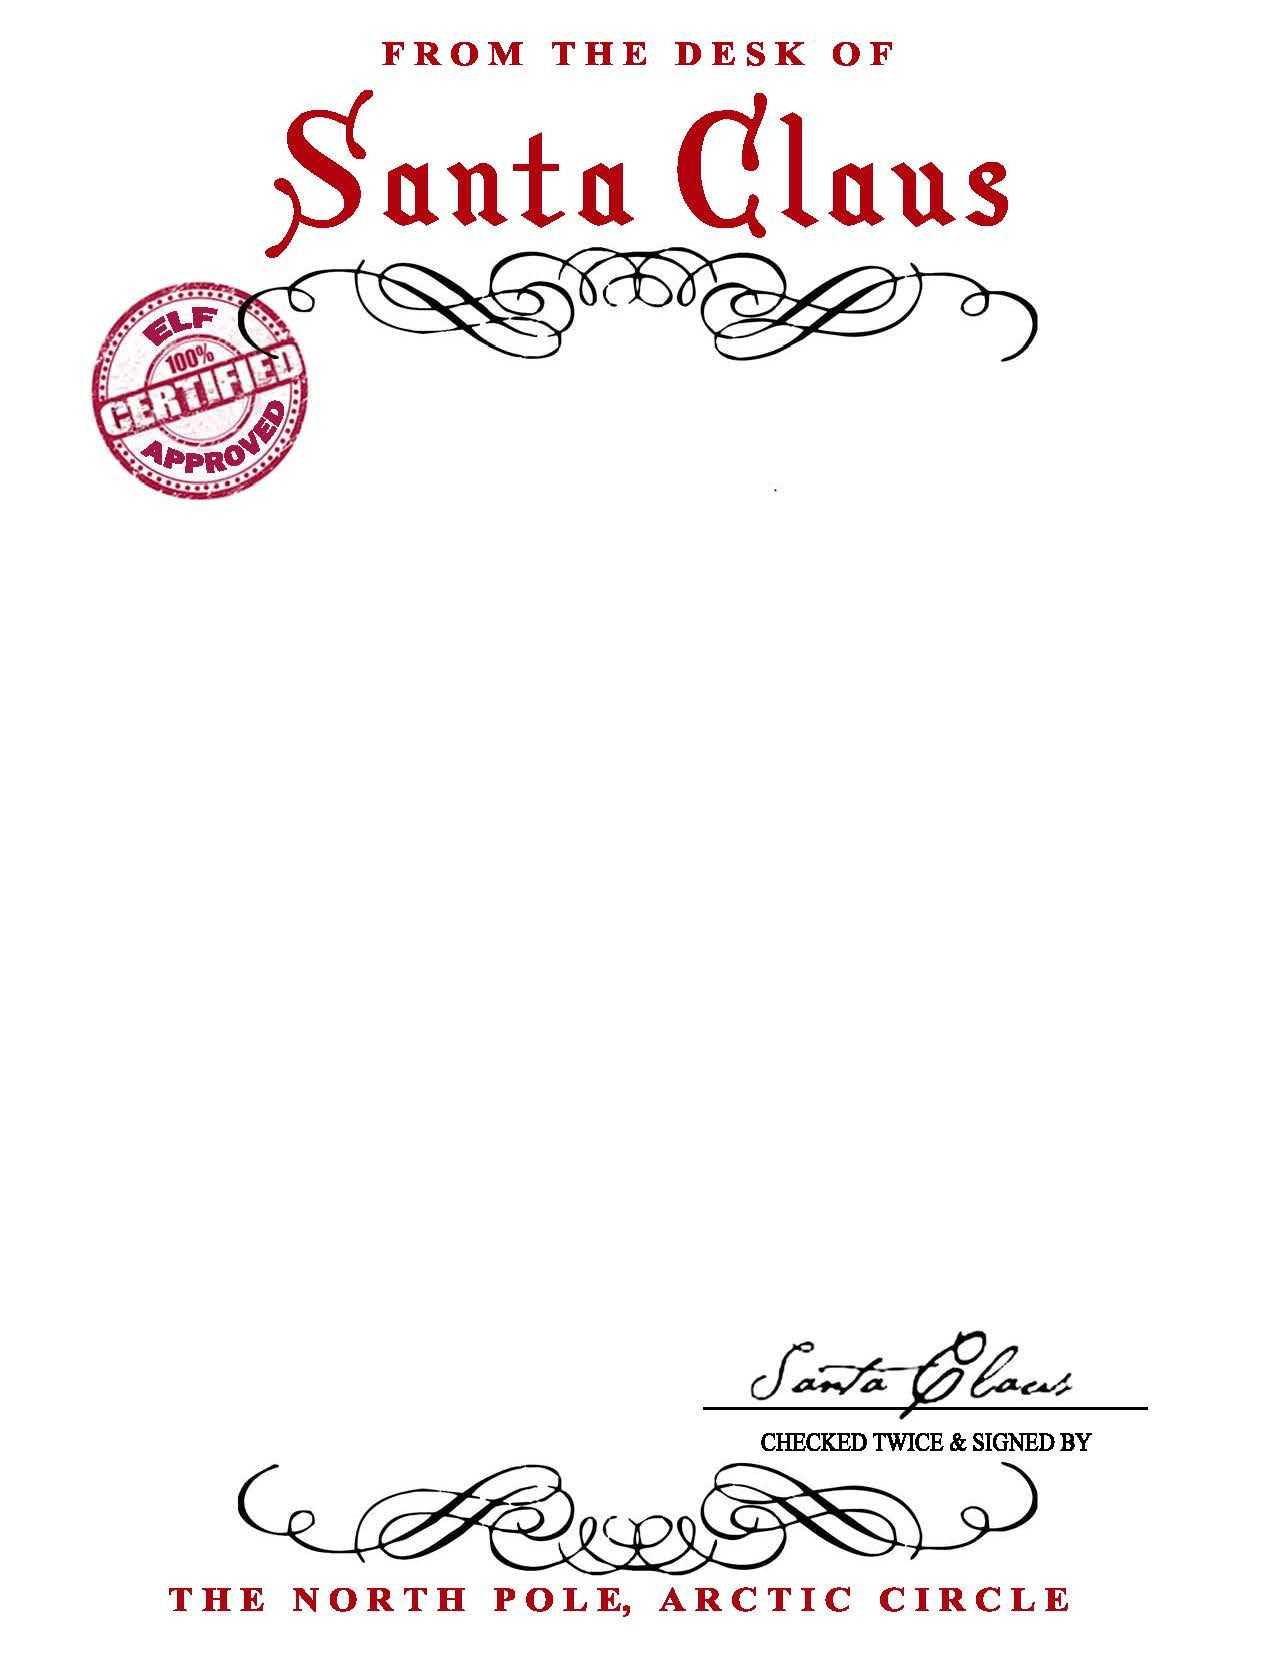 Santa Claus Letterhead.. Will Bring Lots Of Joy To Children With Santa Letter Template Word